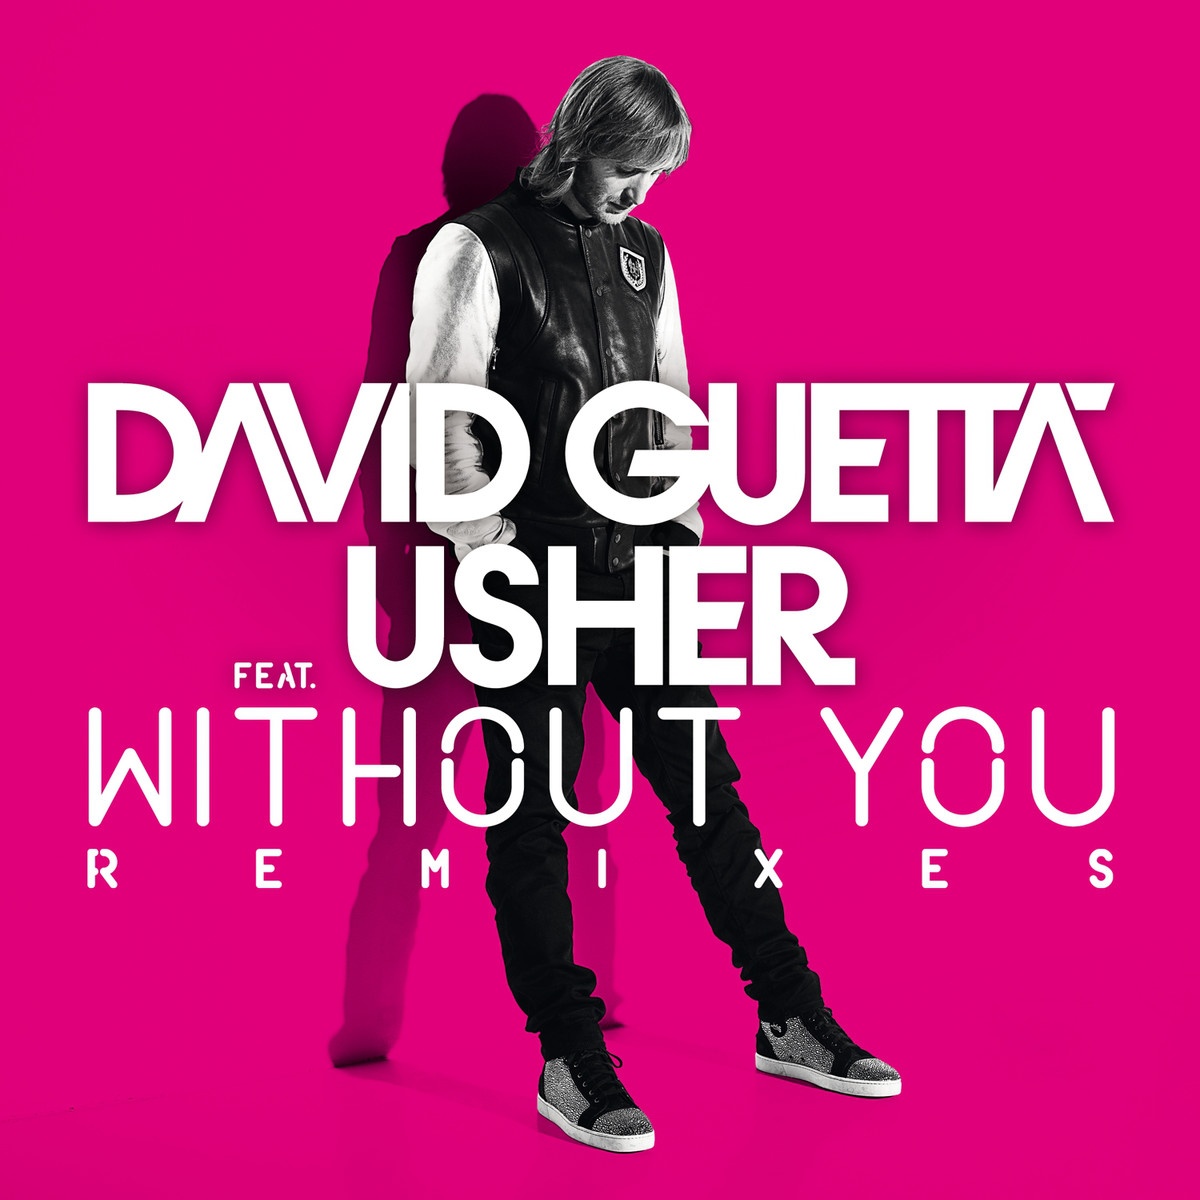 Without You (LNT Remix)